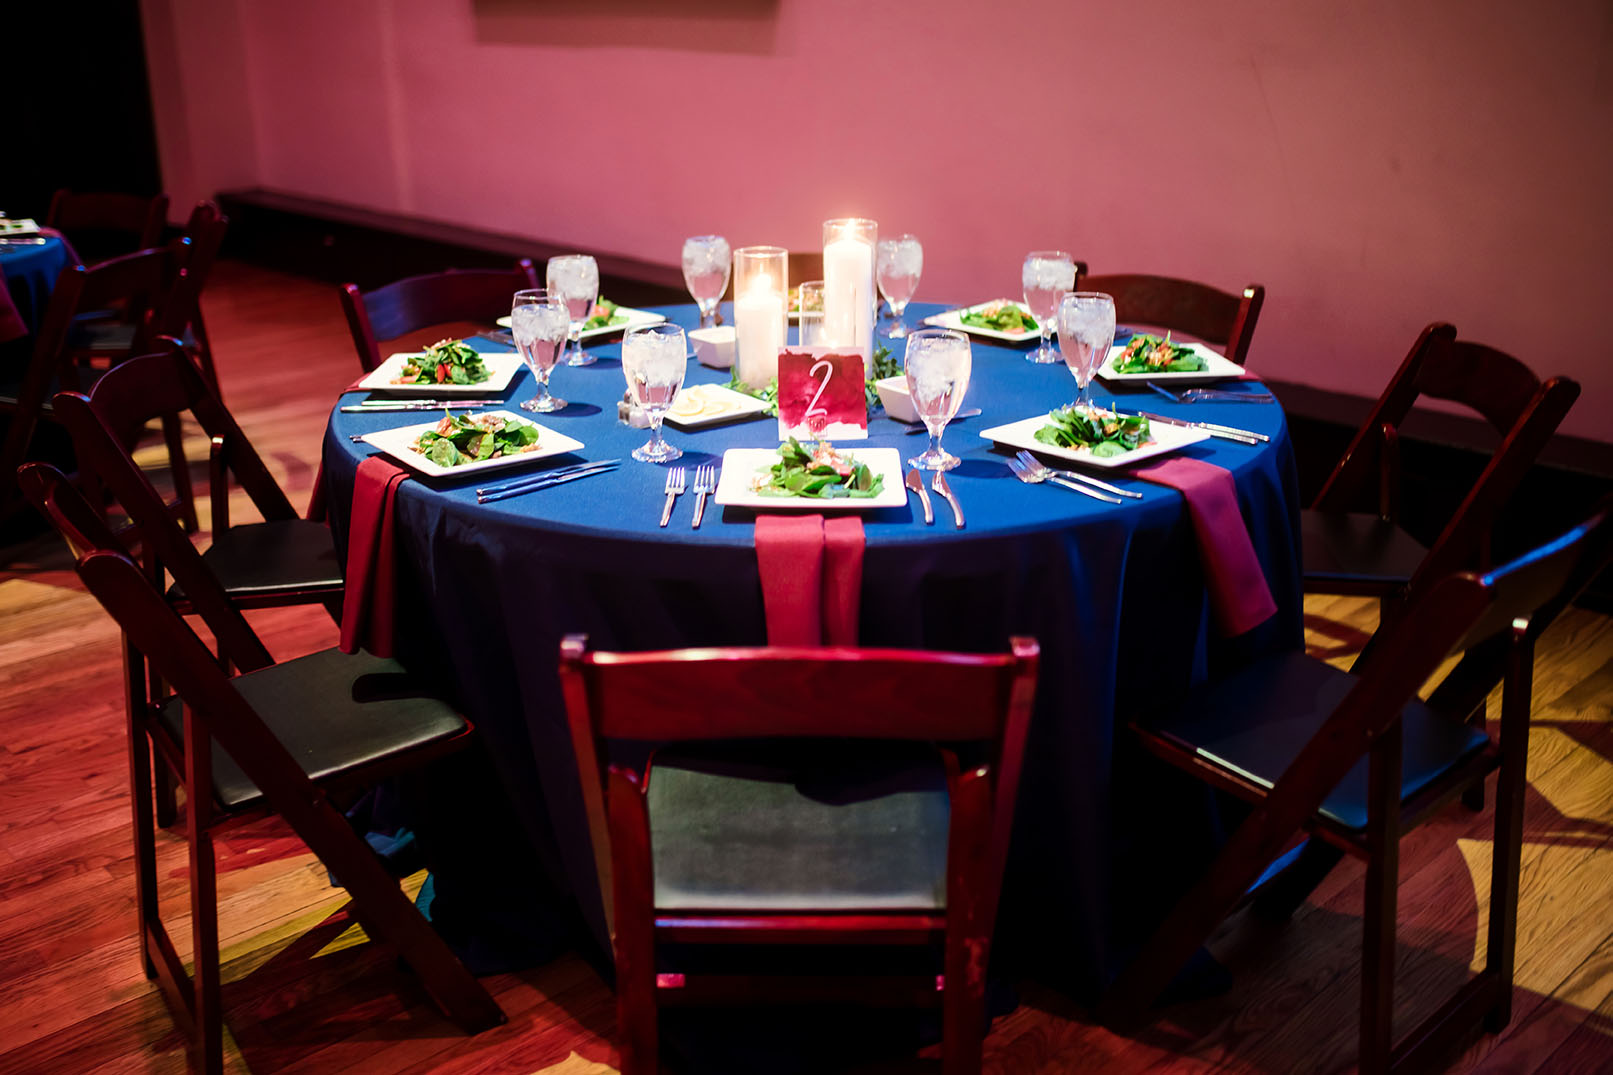 Navy and Burgundy Wedding Table Setting at The Bell Tower